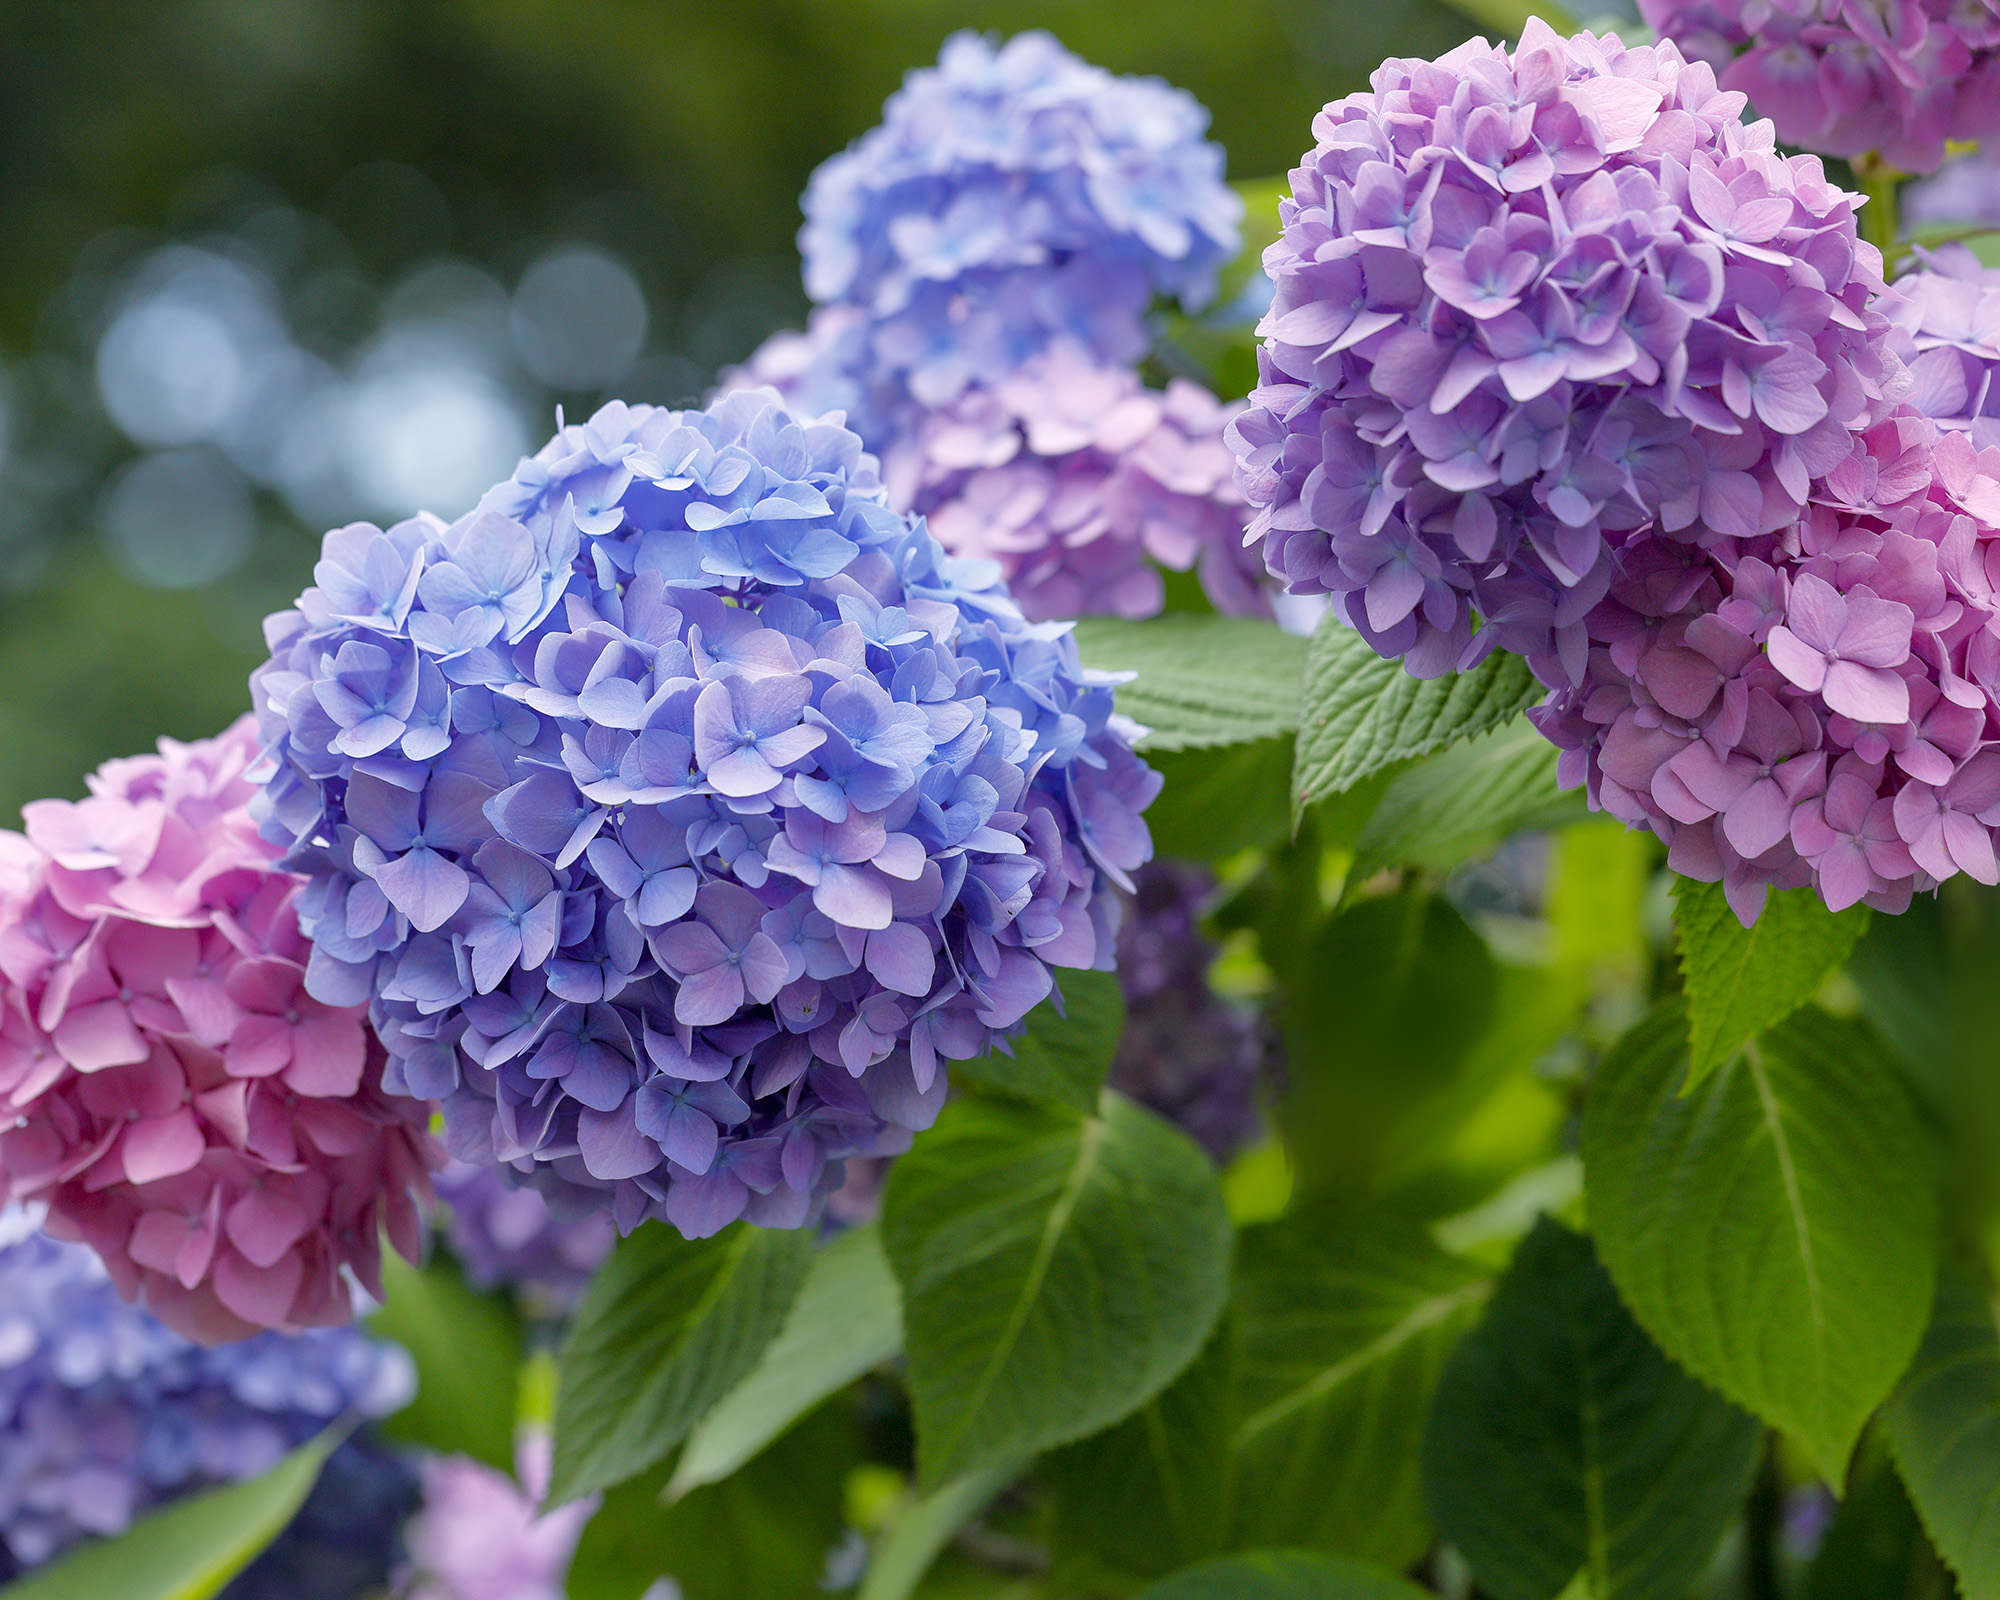 Hydrangea shrub in the cutting garden featuring flowers in blue, purple, and pink